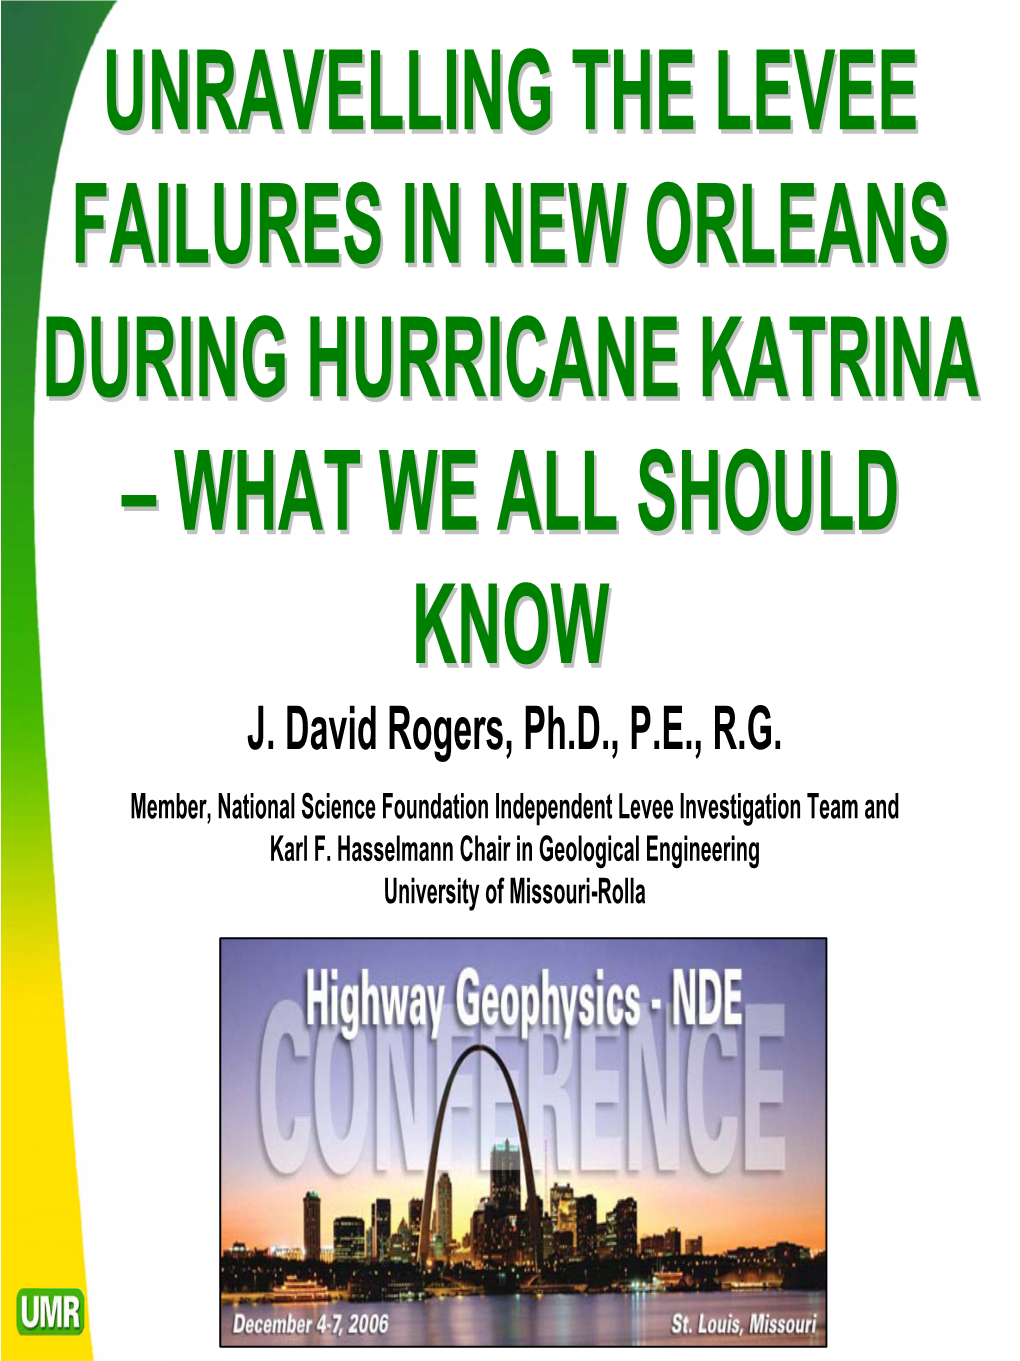 Unraveling the Levee Failure in New Orleans During Hurricane Katrina